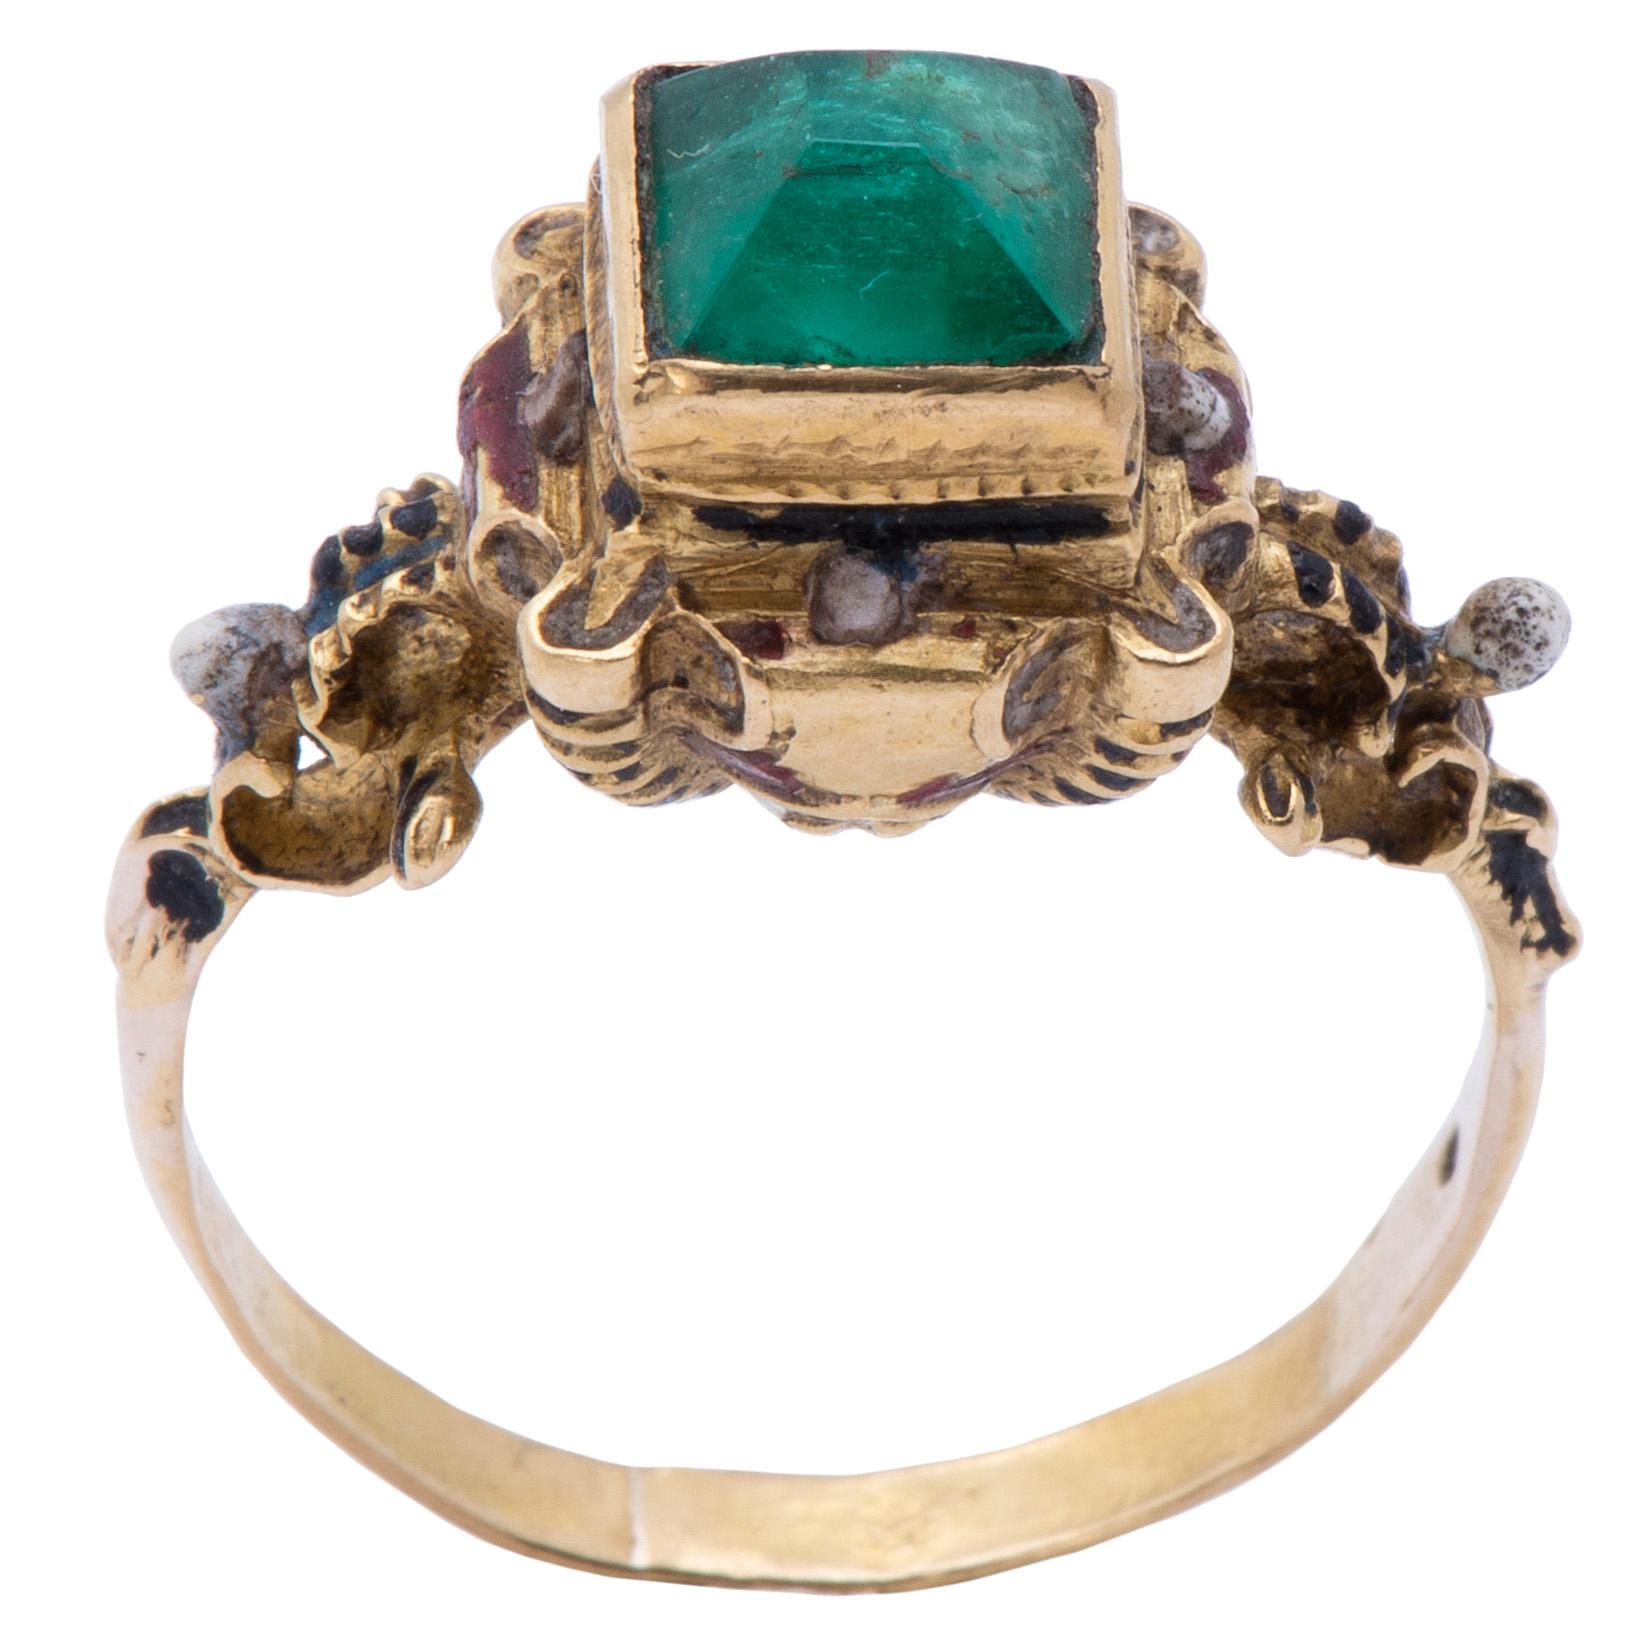 RENAISSANCE REVIVAL RING 
Western Europe, late 19th to early 20th century 
Gold, glass and polychrome enamel 
Weight 4.3 gr.; bezel 10.7 x 11.00 x 11.1 mm.; circumference 55.3 mm.; US size  7.5; UK size P 

A slender hoop supports a massive